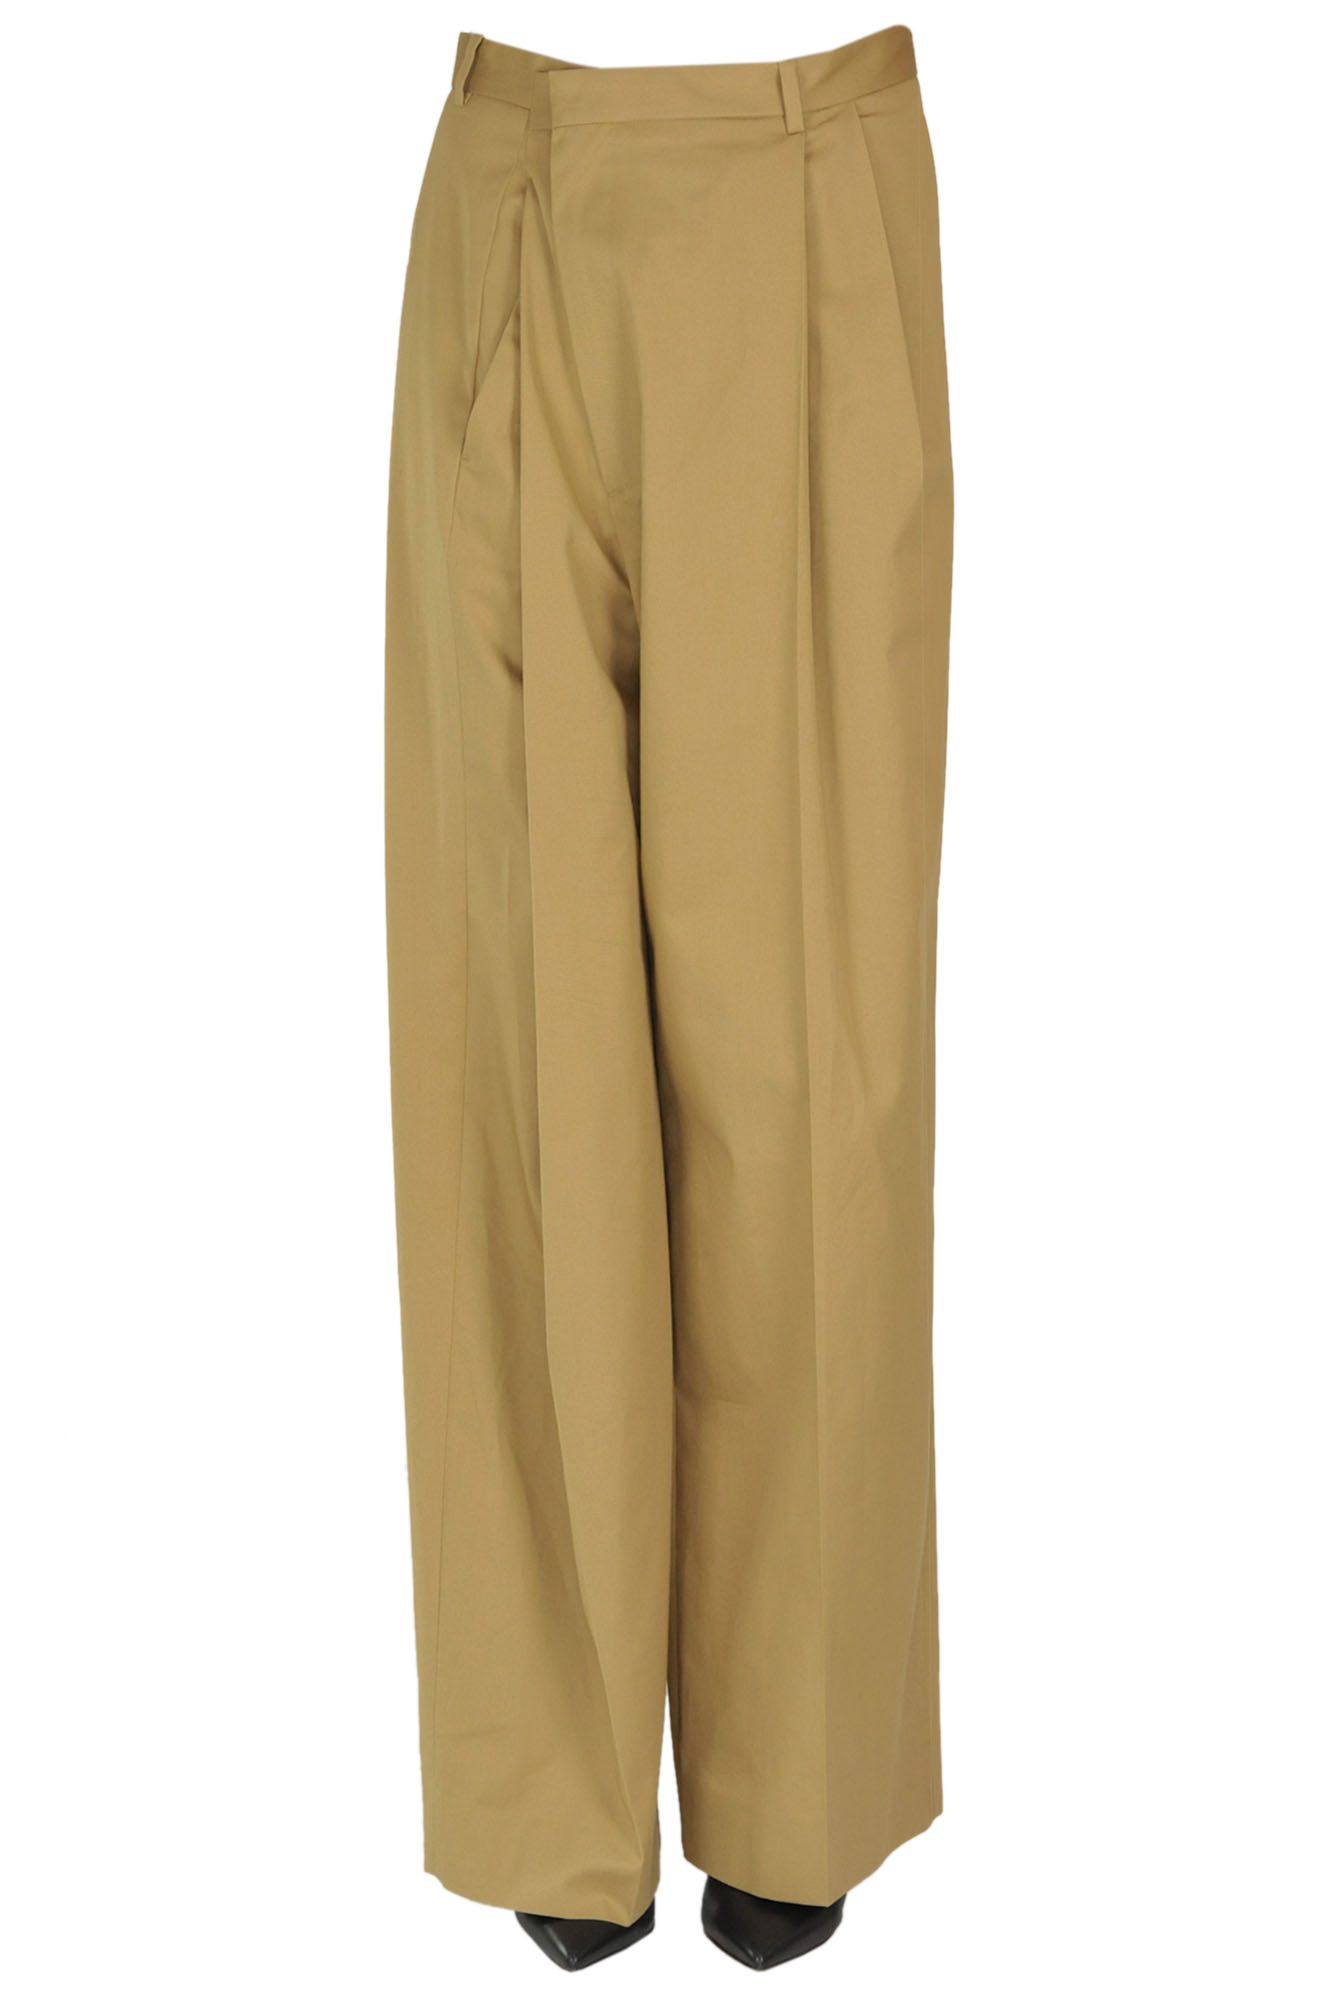 Maison Margiela Deconstructed Cotton Trousers In Camel